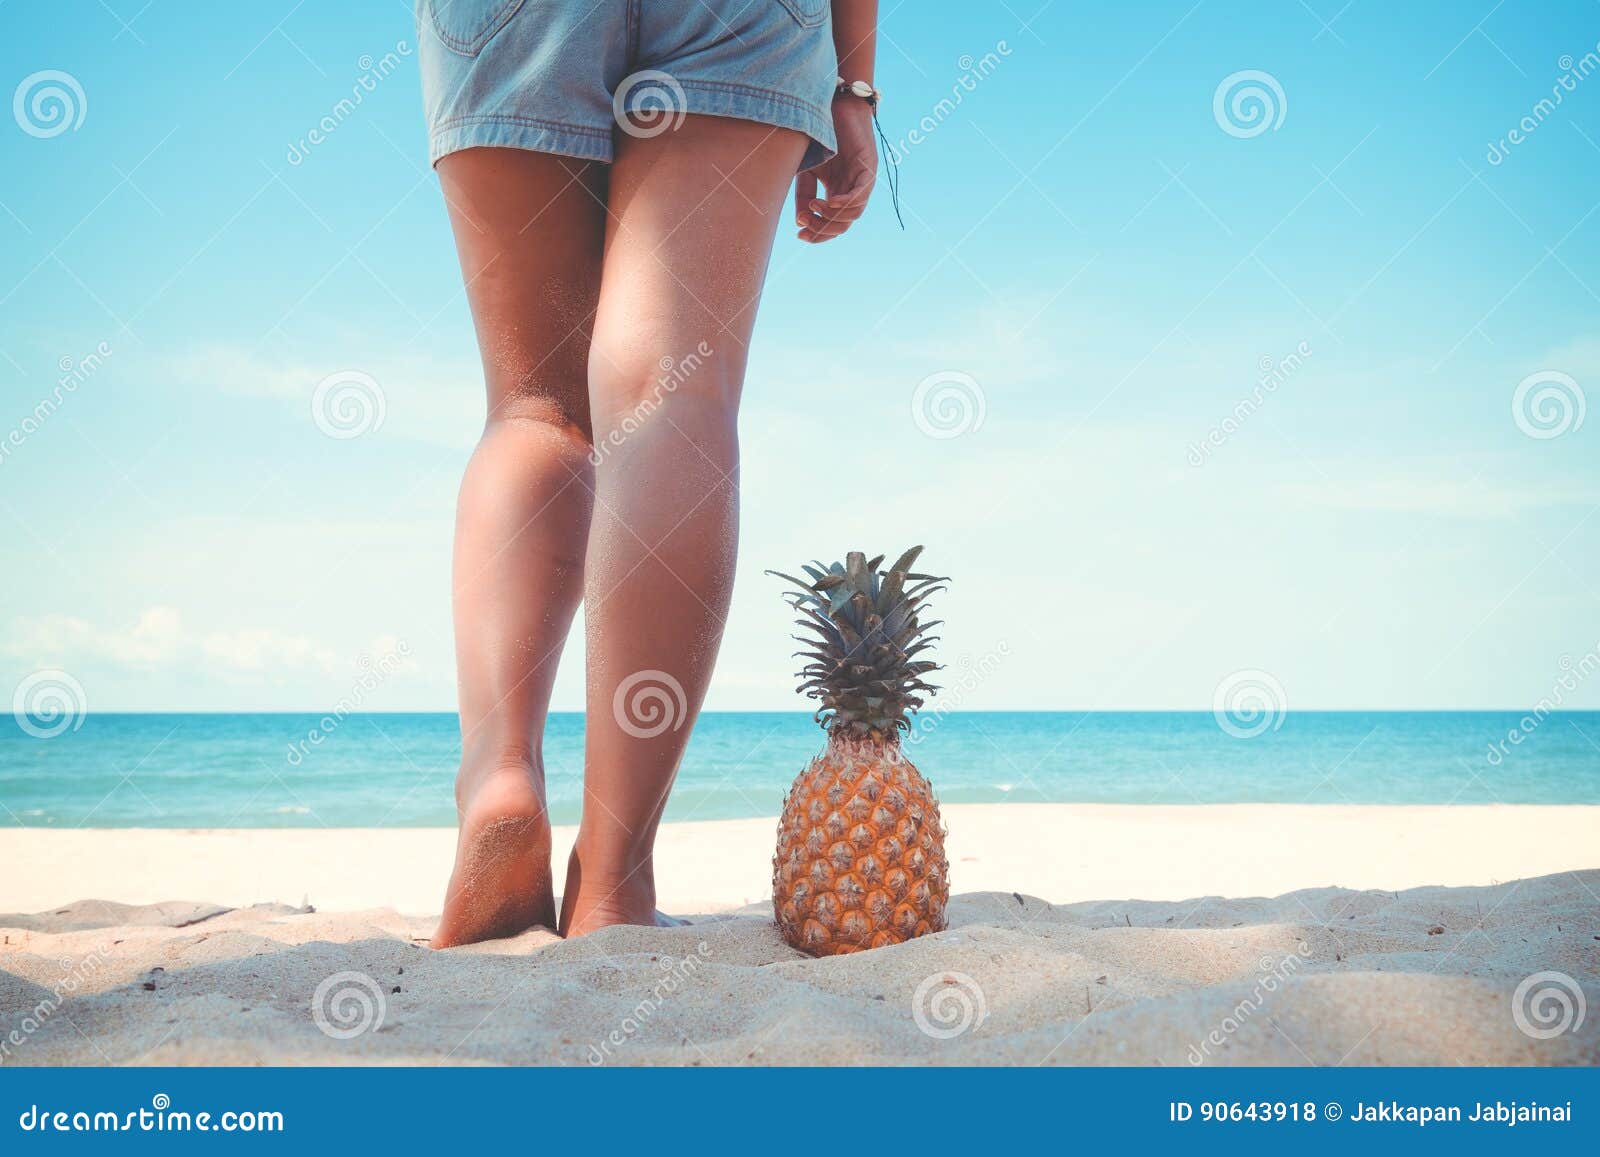 Tanned Legs Of Young Woman Standing With Pineapple At Tropical Beach In 